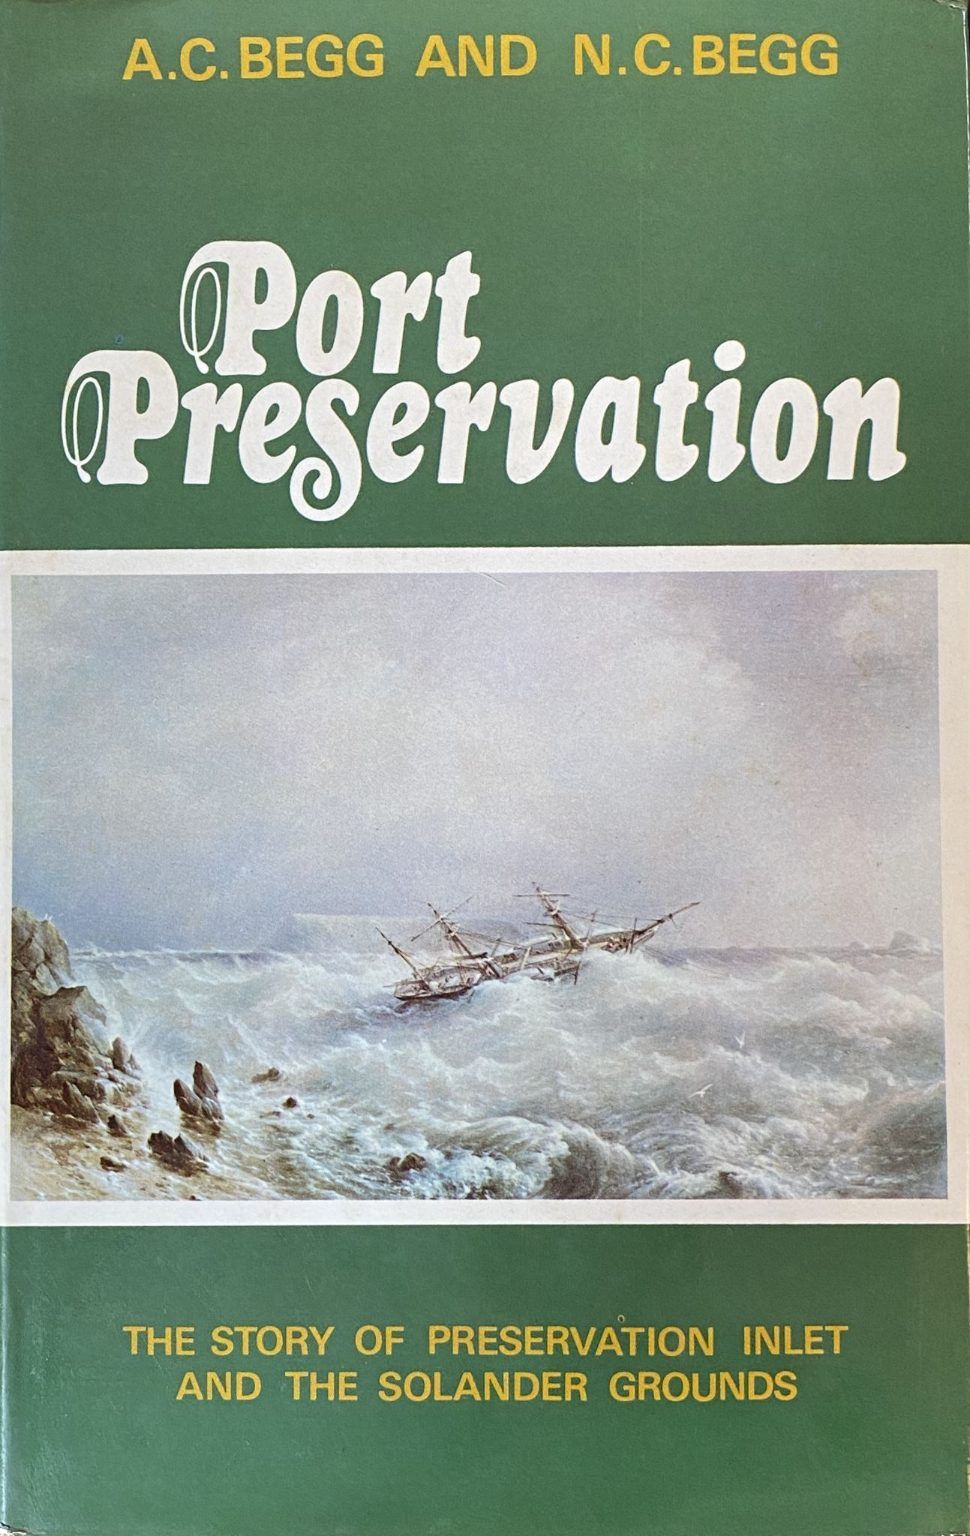 PORT PRESERVATION: The Story of Preservation Inlet and the Solander Grounds